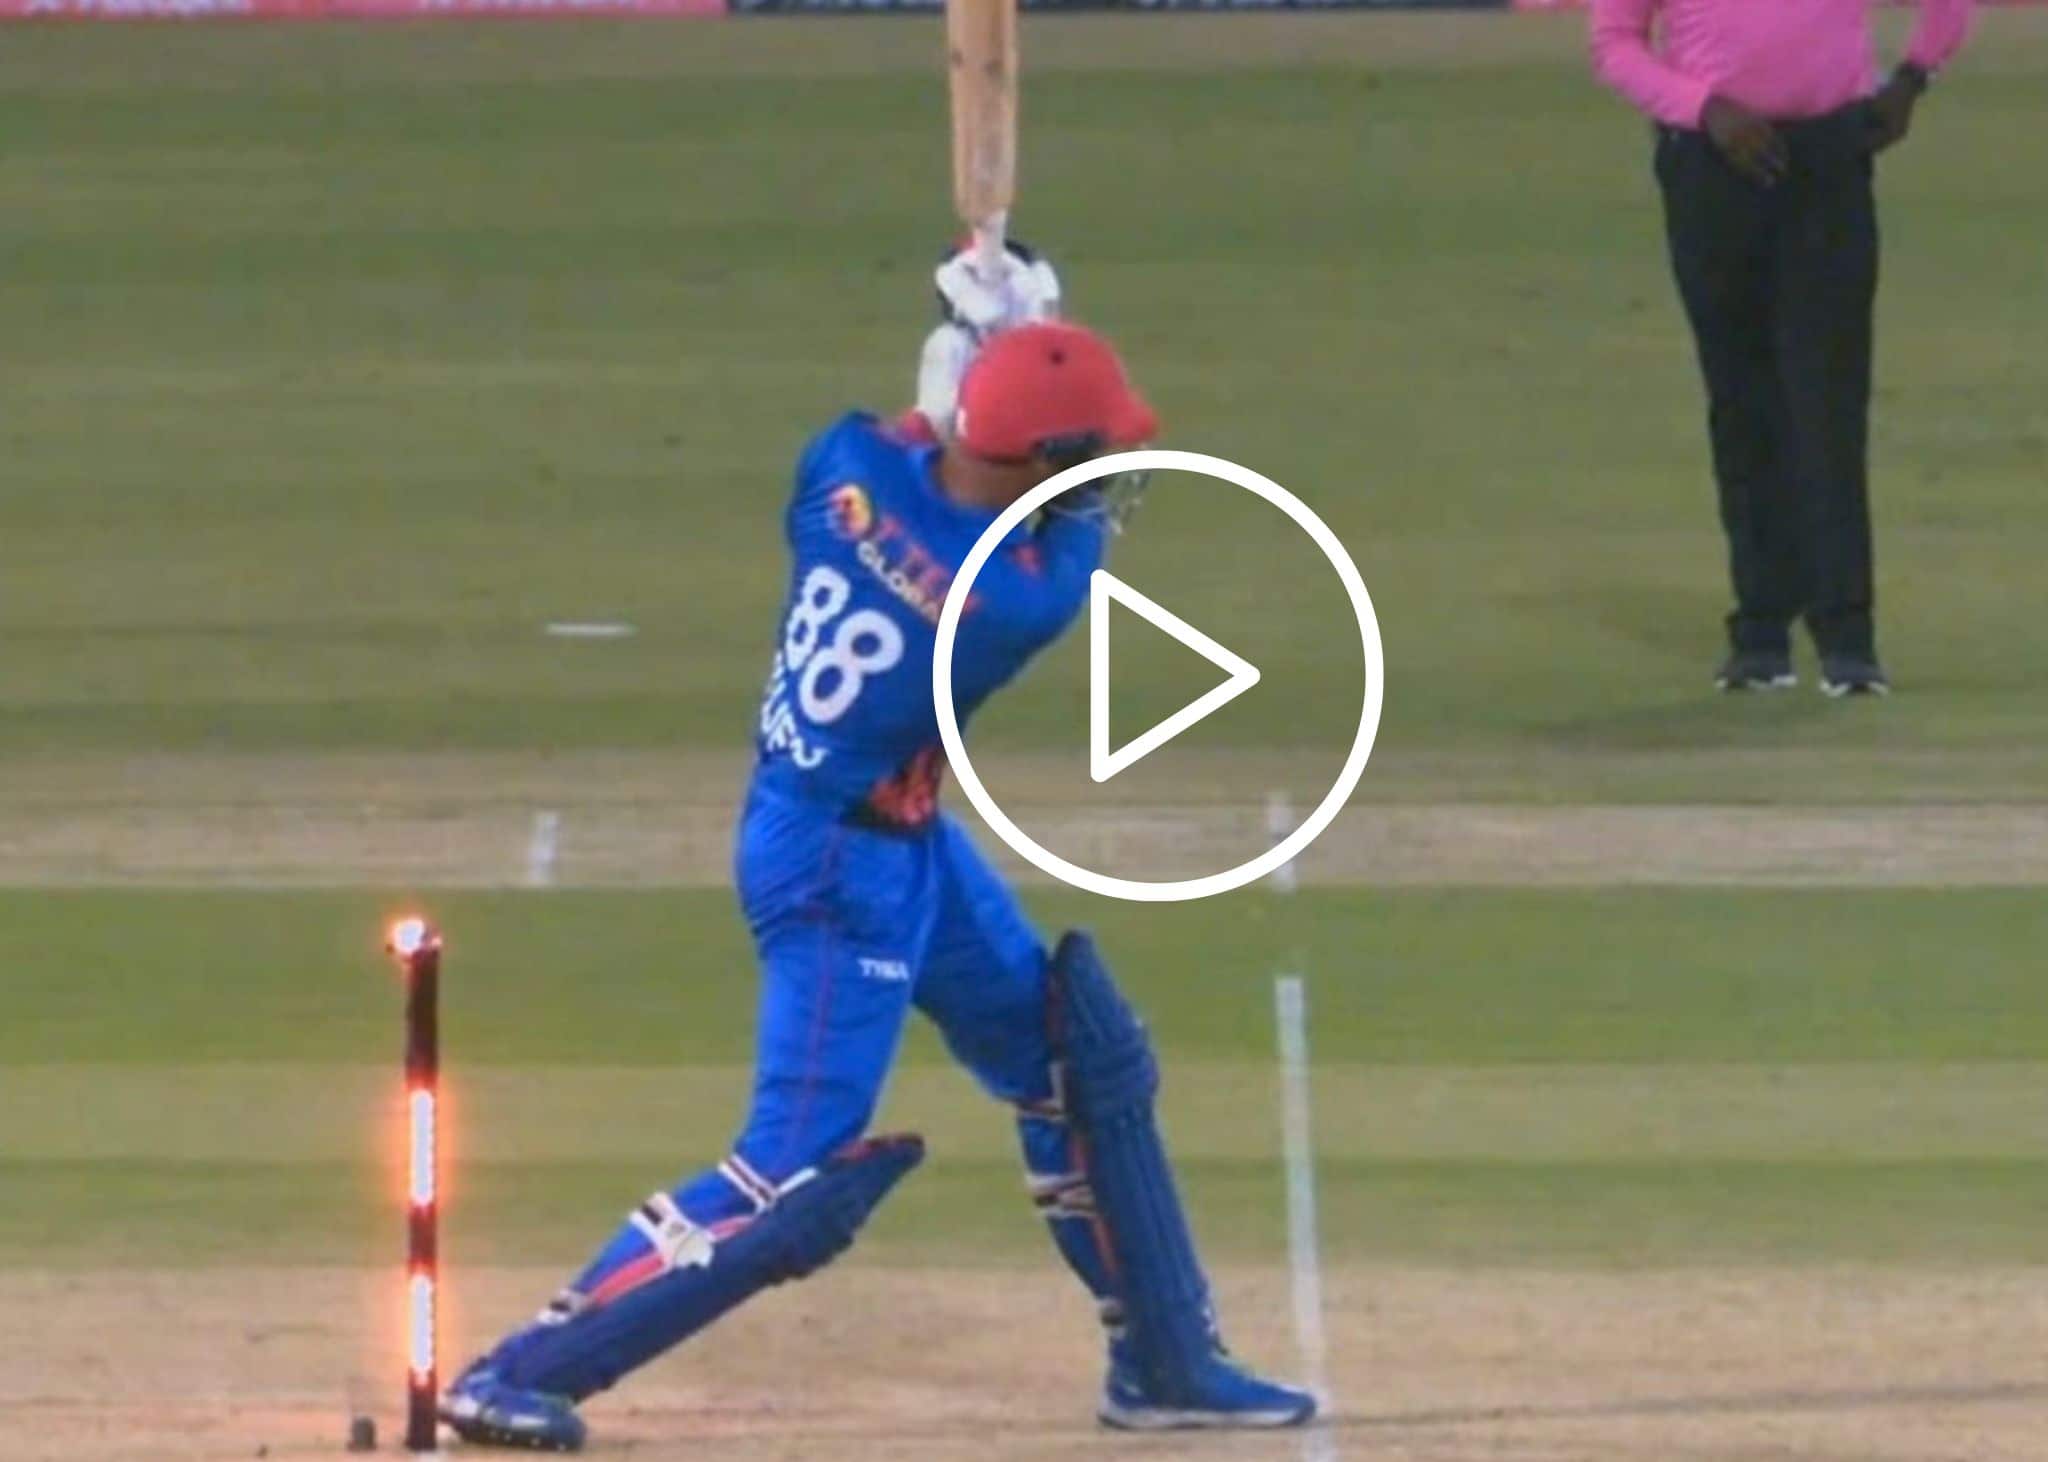 [Watch] Mujeeb Ur Rahman Gets Hit-Wicket Again; This Time After Hitting A Six